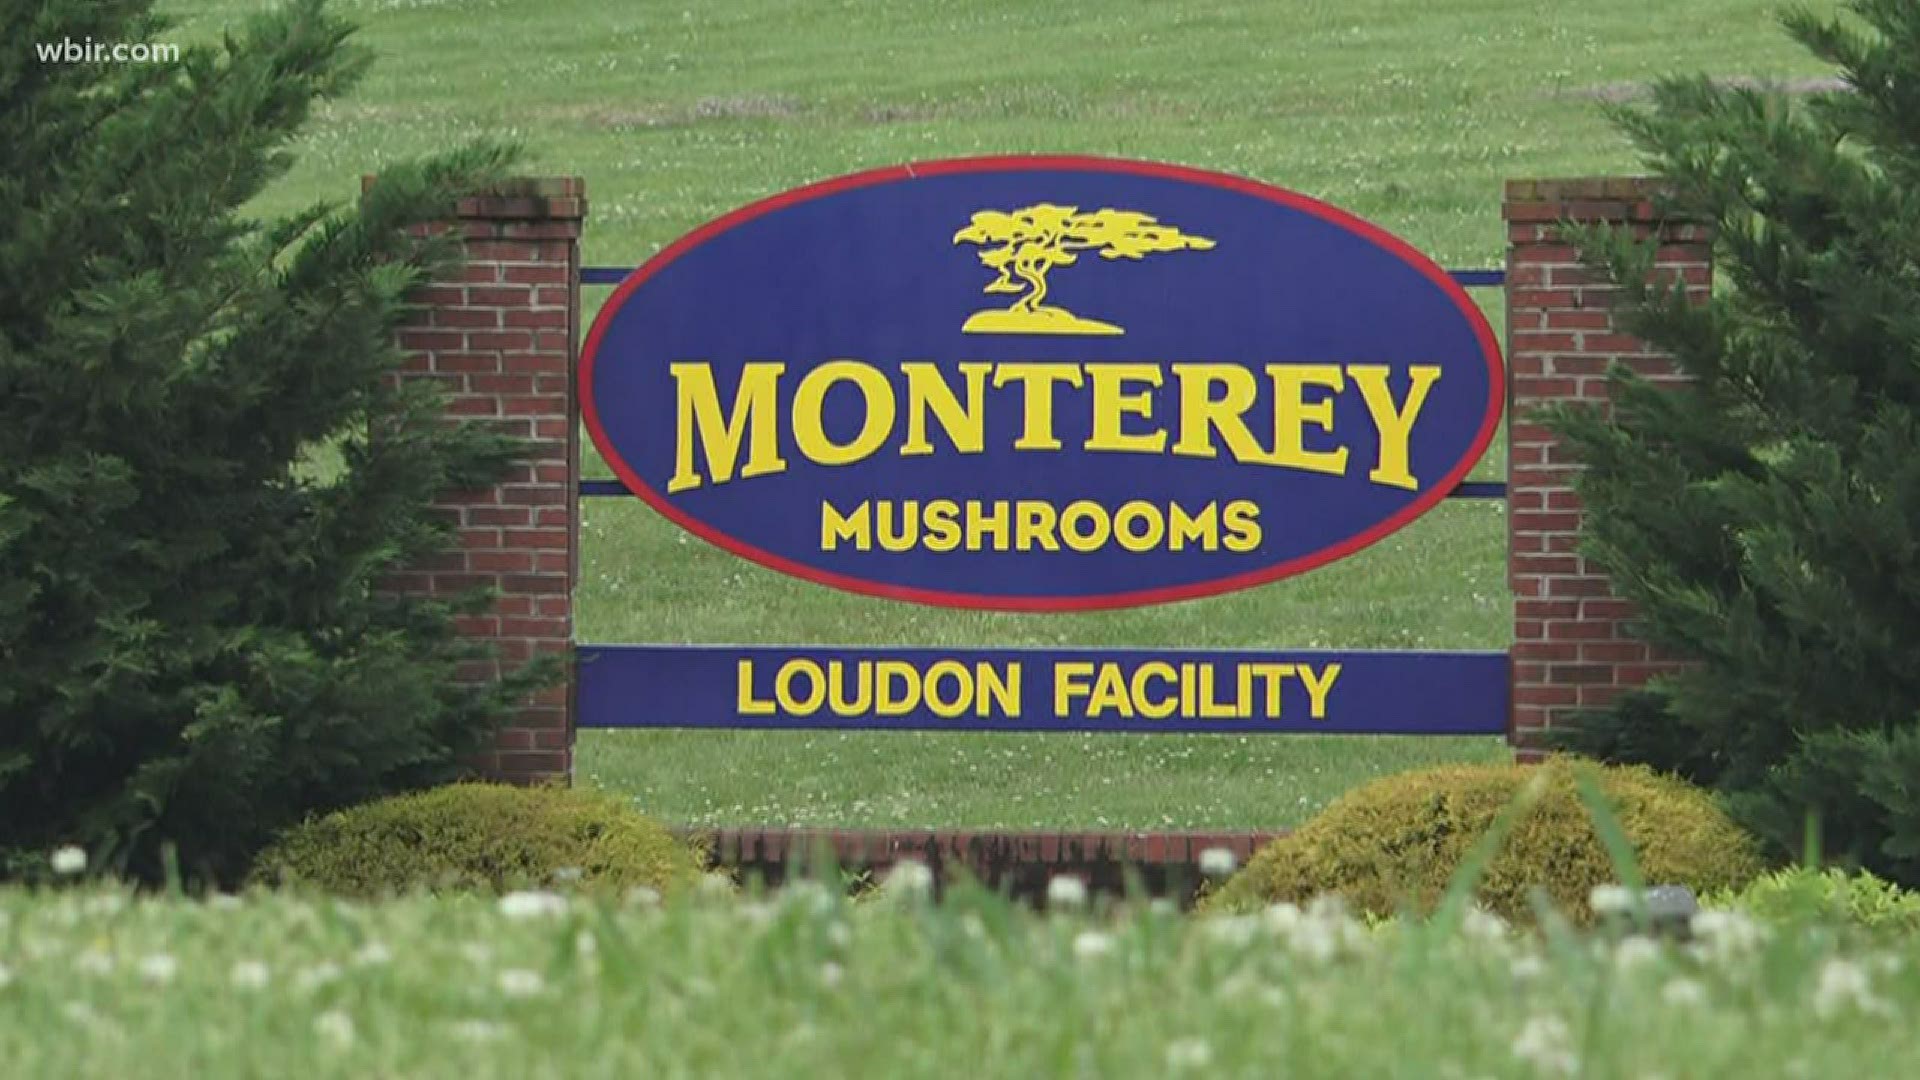 The Monterey Mushrooms factory in Loudon County says 59 of its workers have tested positive for COVID-19.